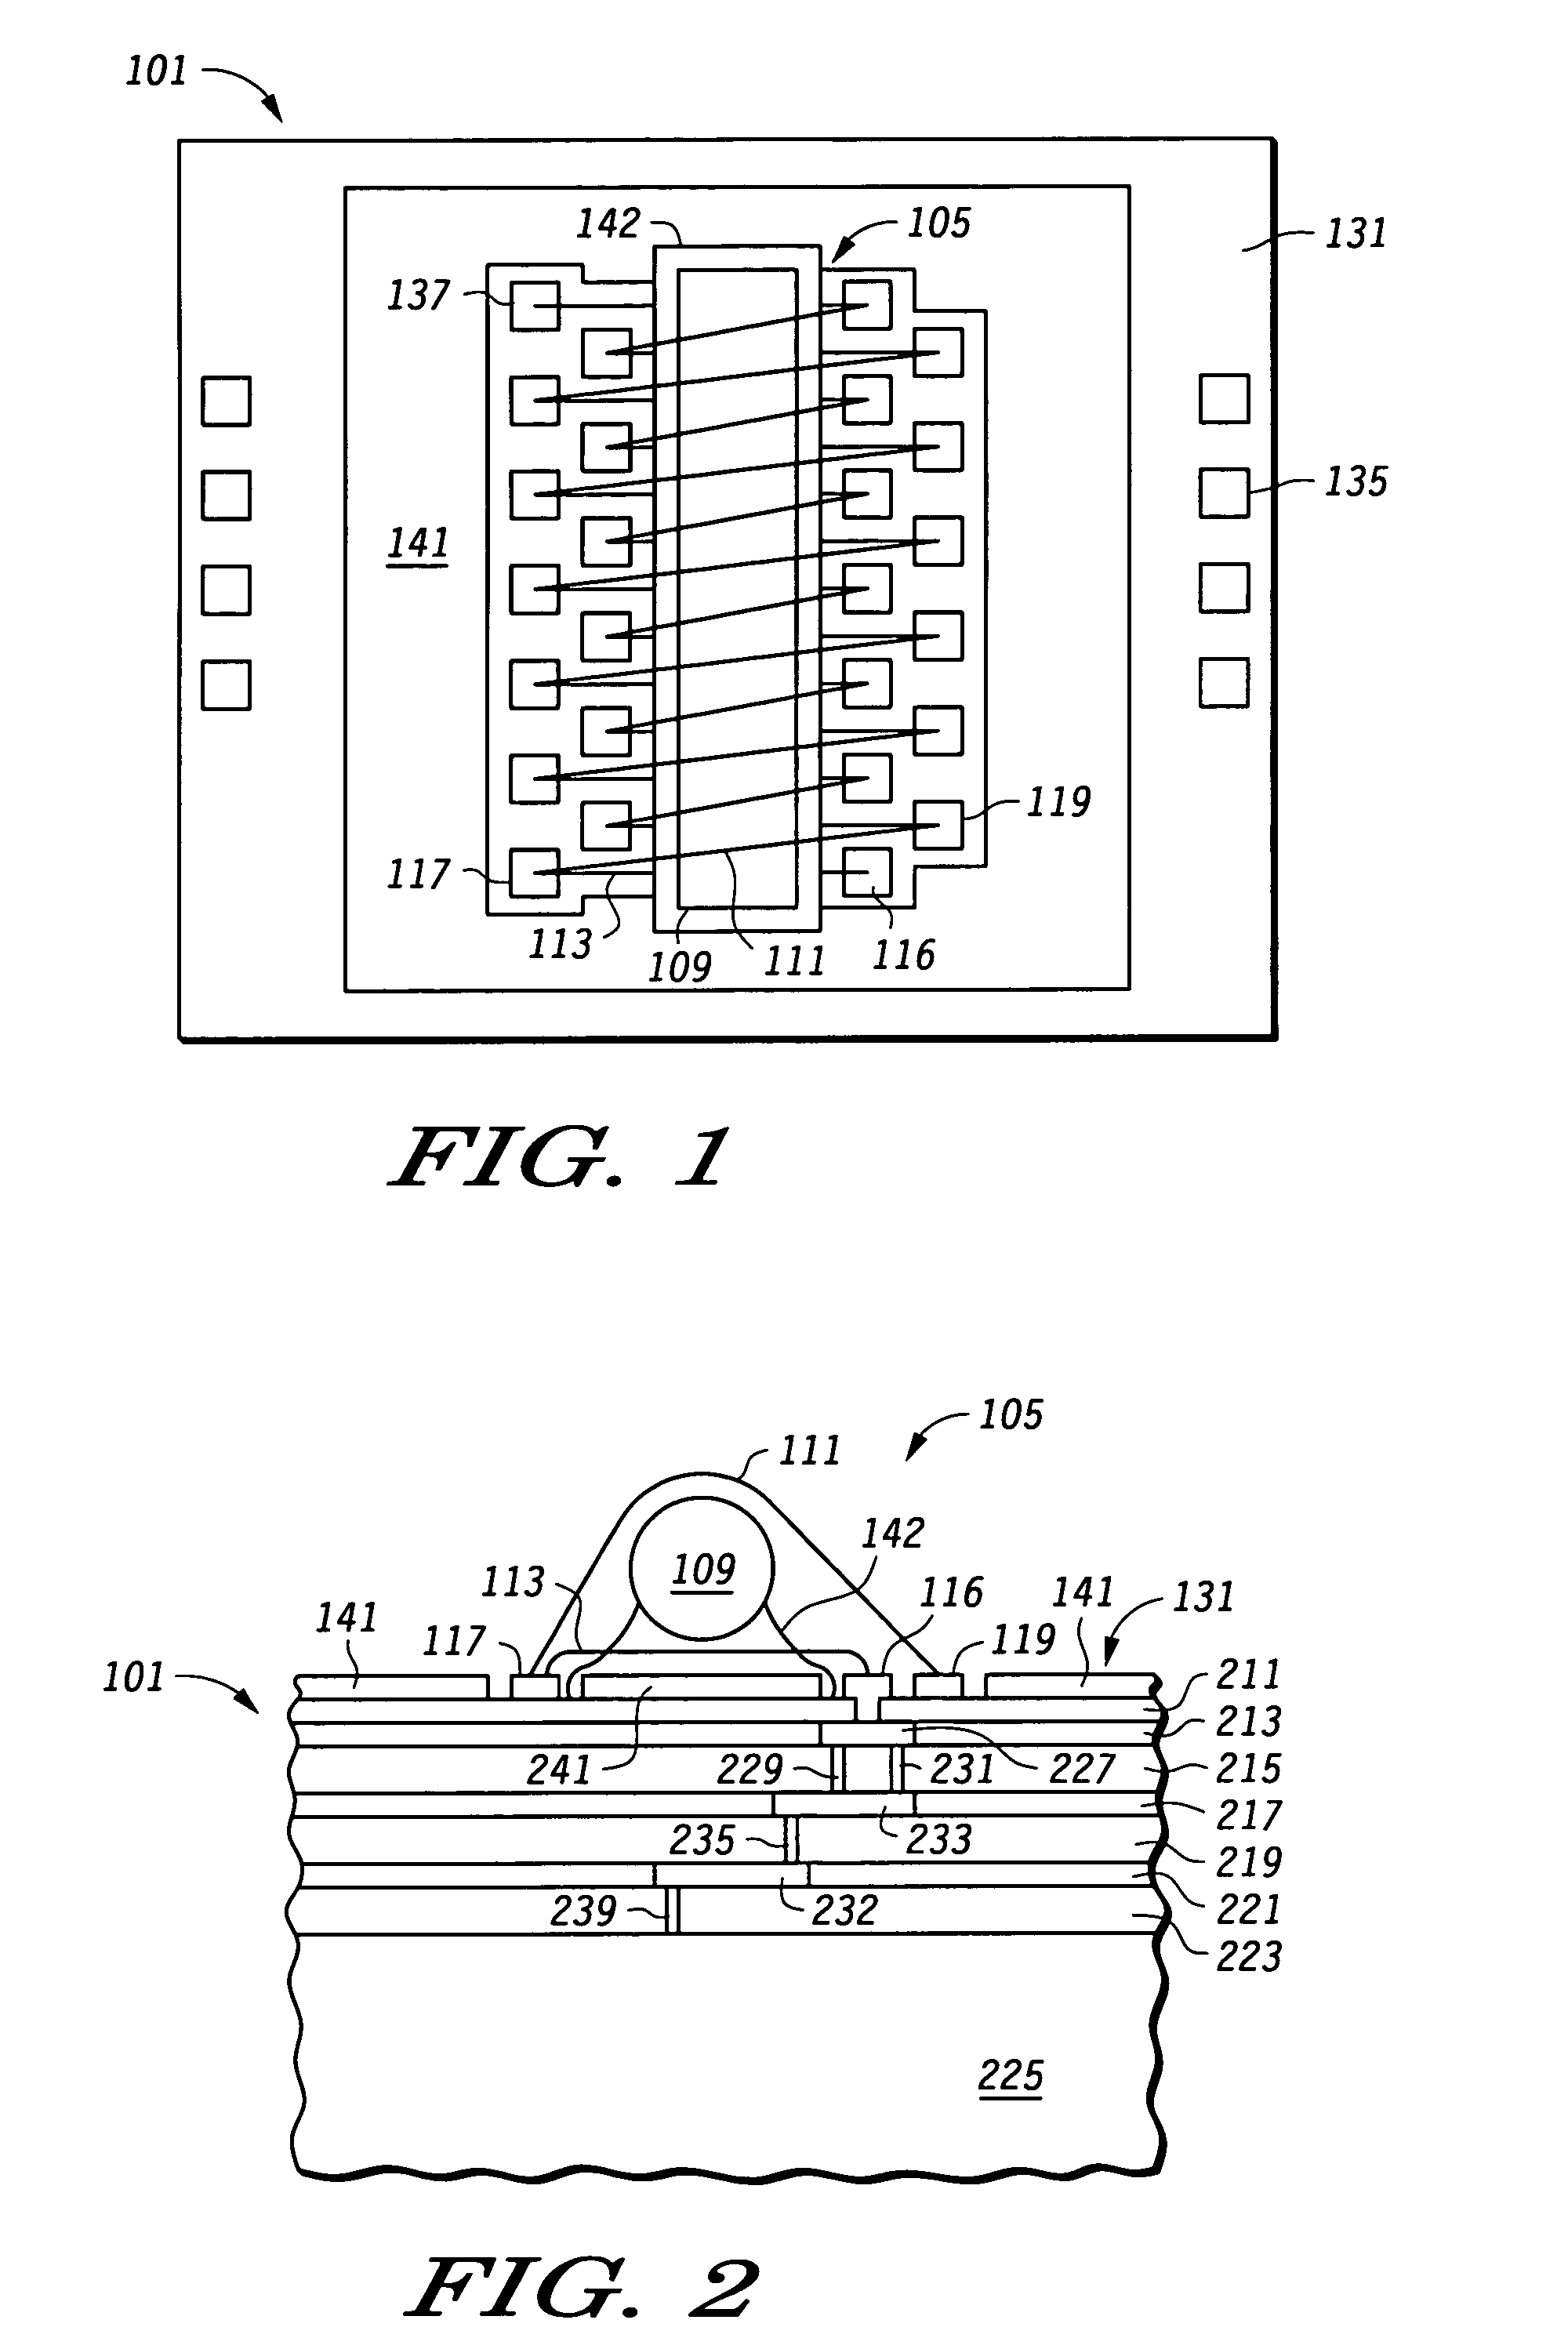 Inductive device including bond wires